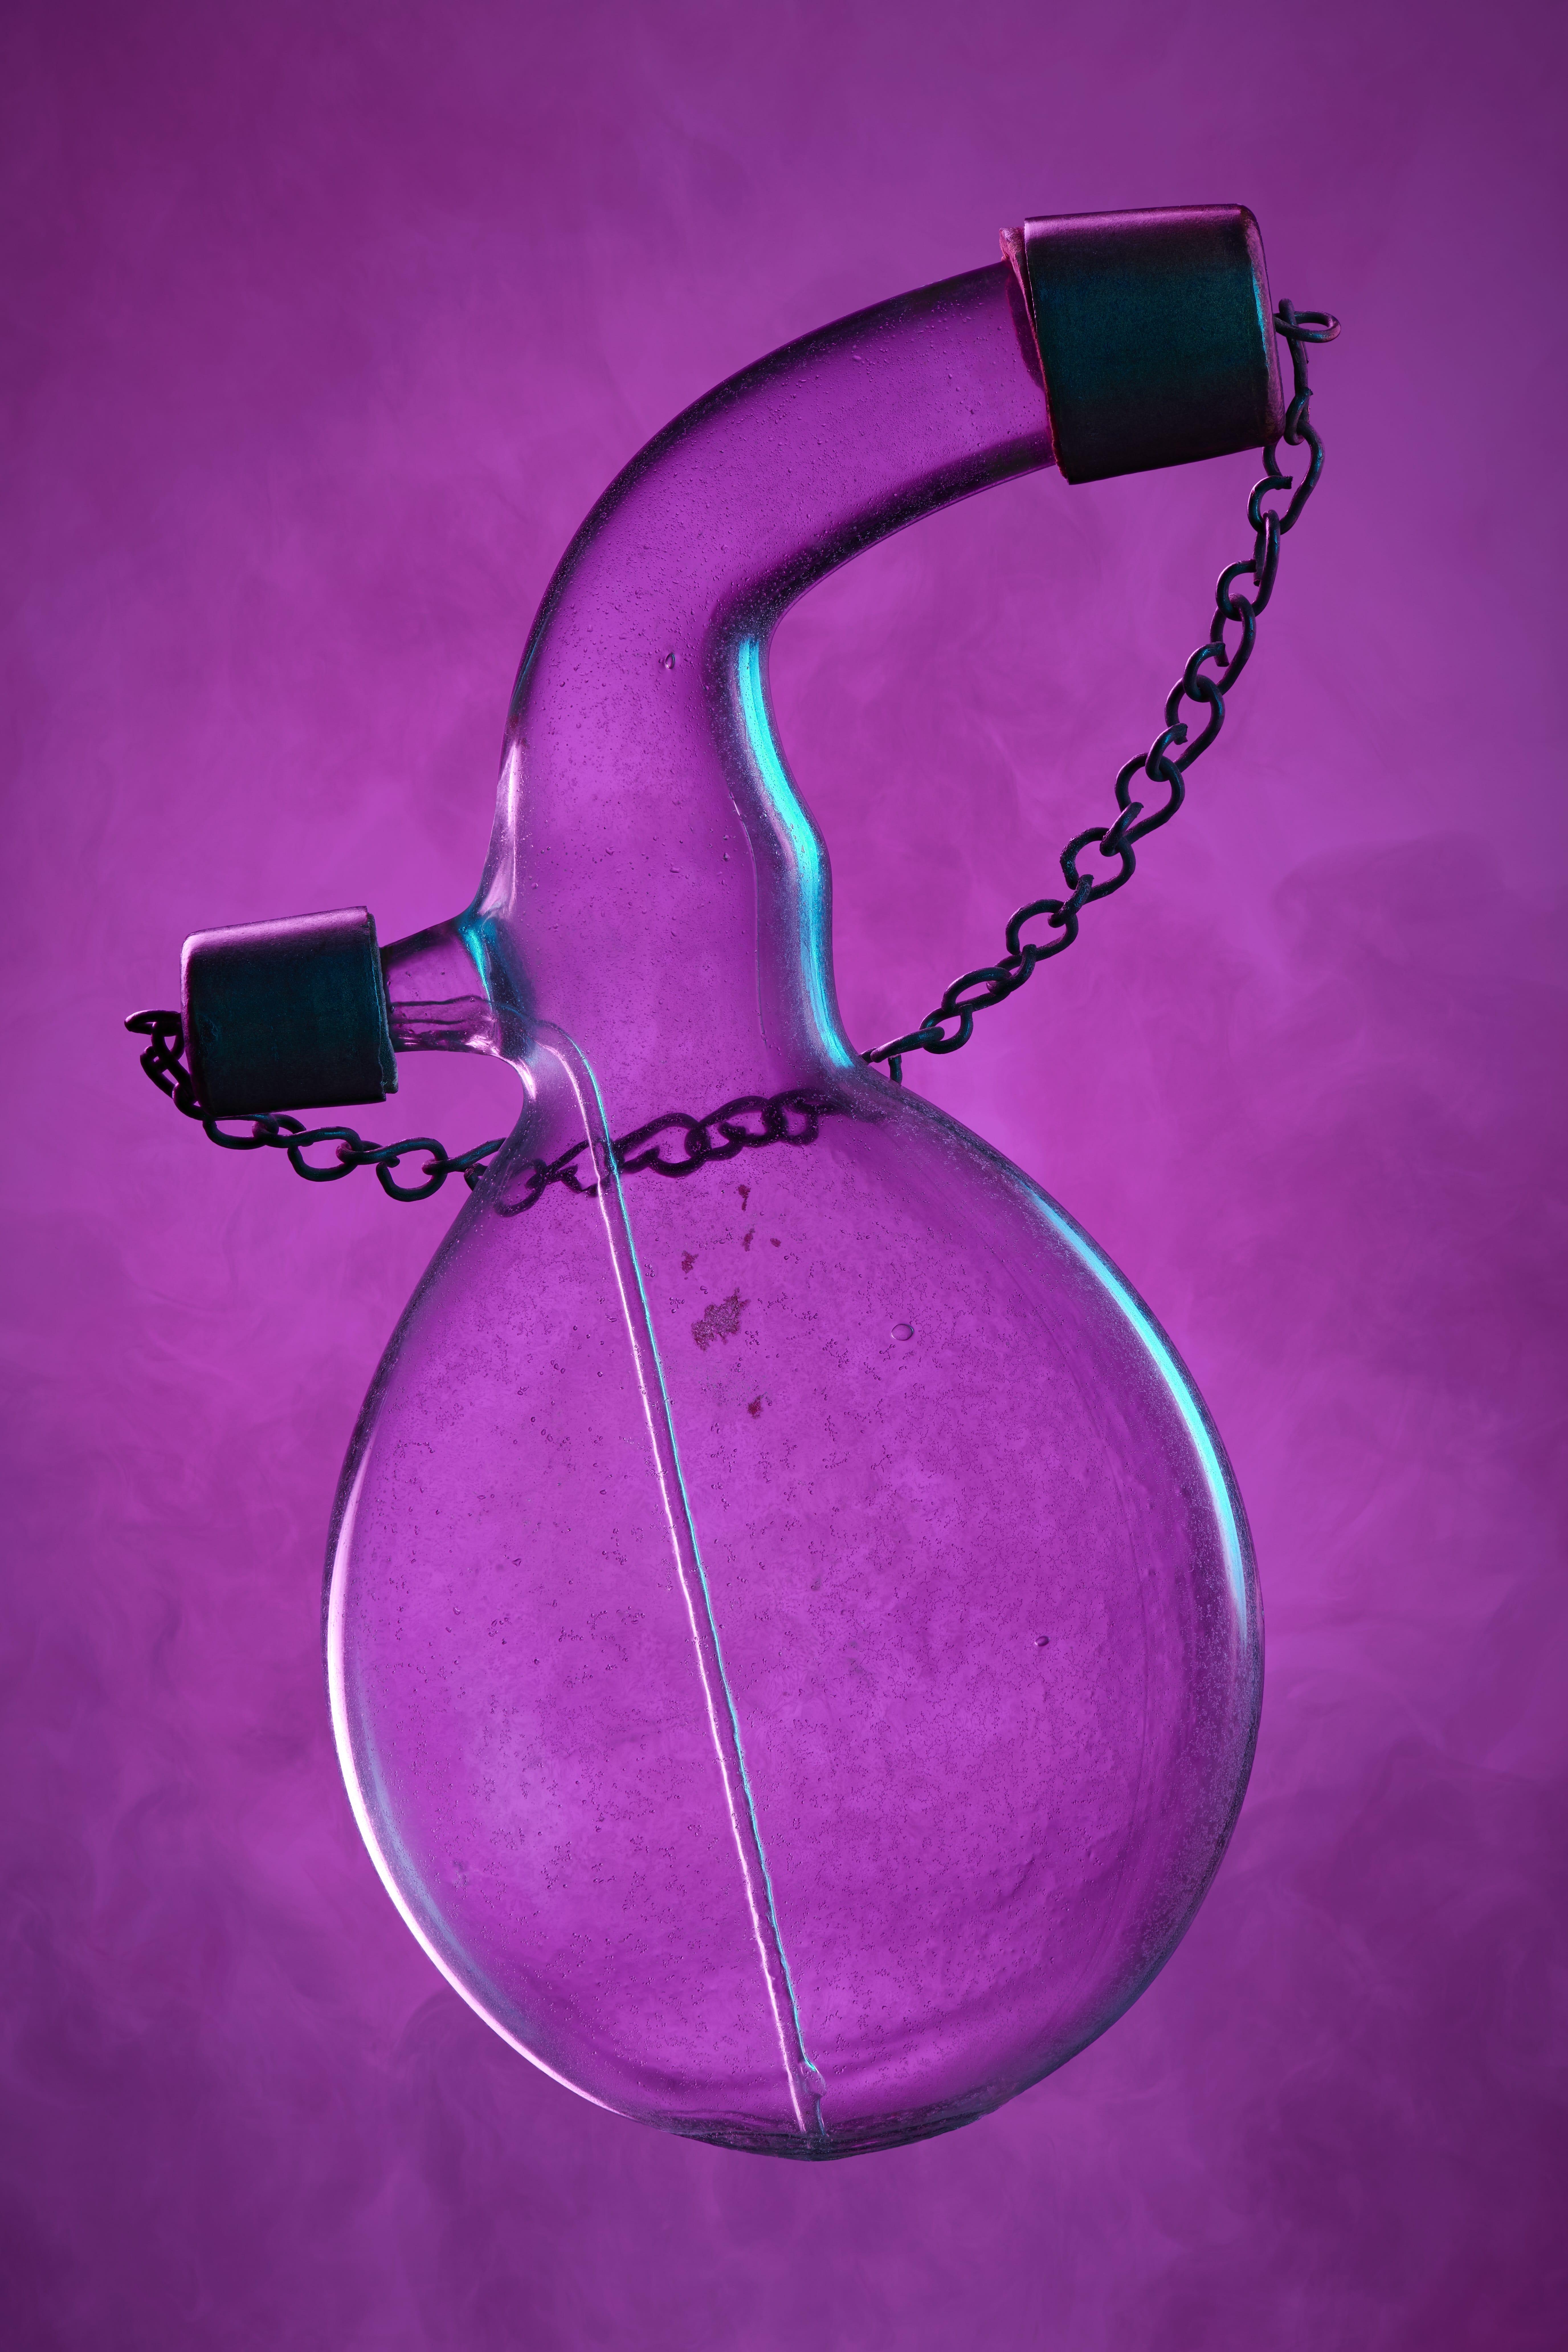 Circular glass flask with two necks, metal gap on each neck, caps connected by a small chain. All on a smoky pink background